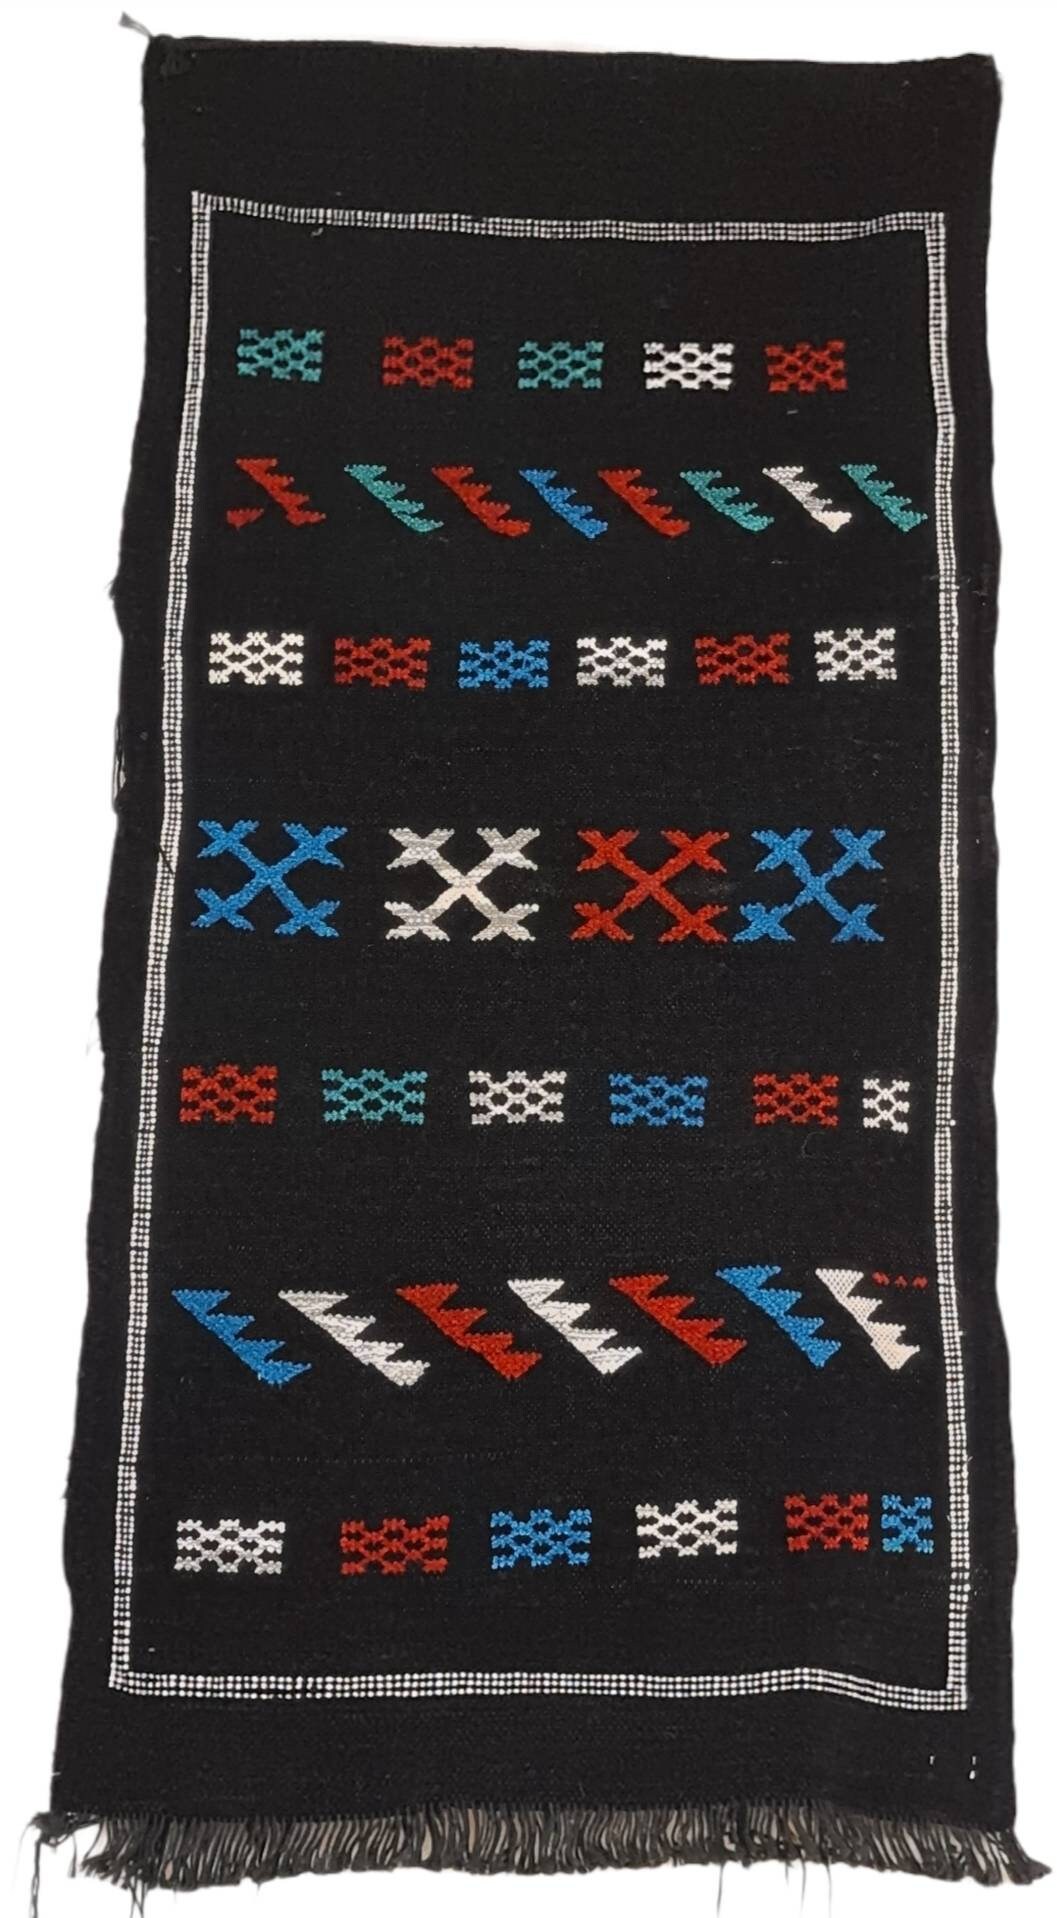 Bathroom Mats  Bed Side Rugs Cotton Kilims